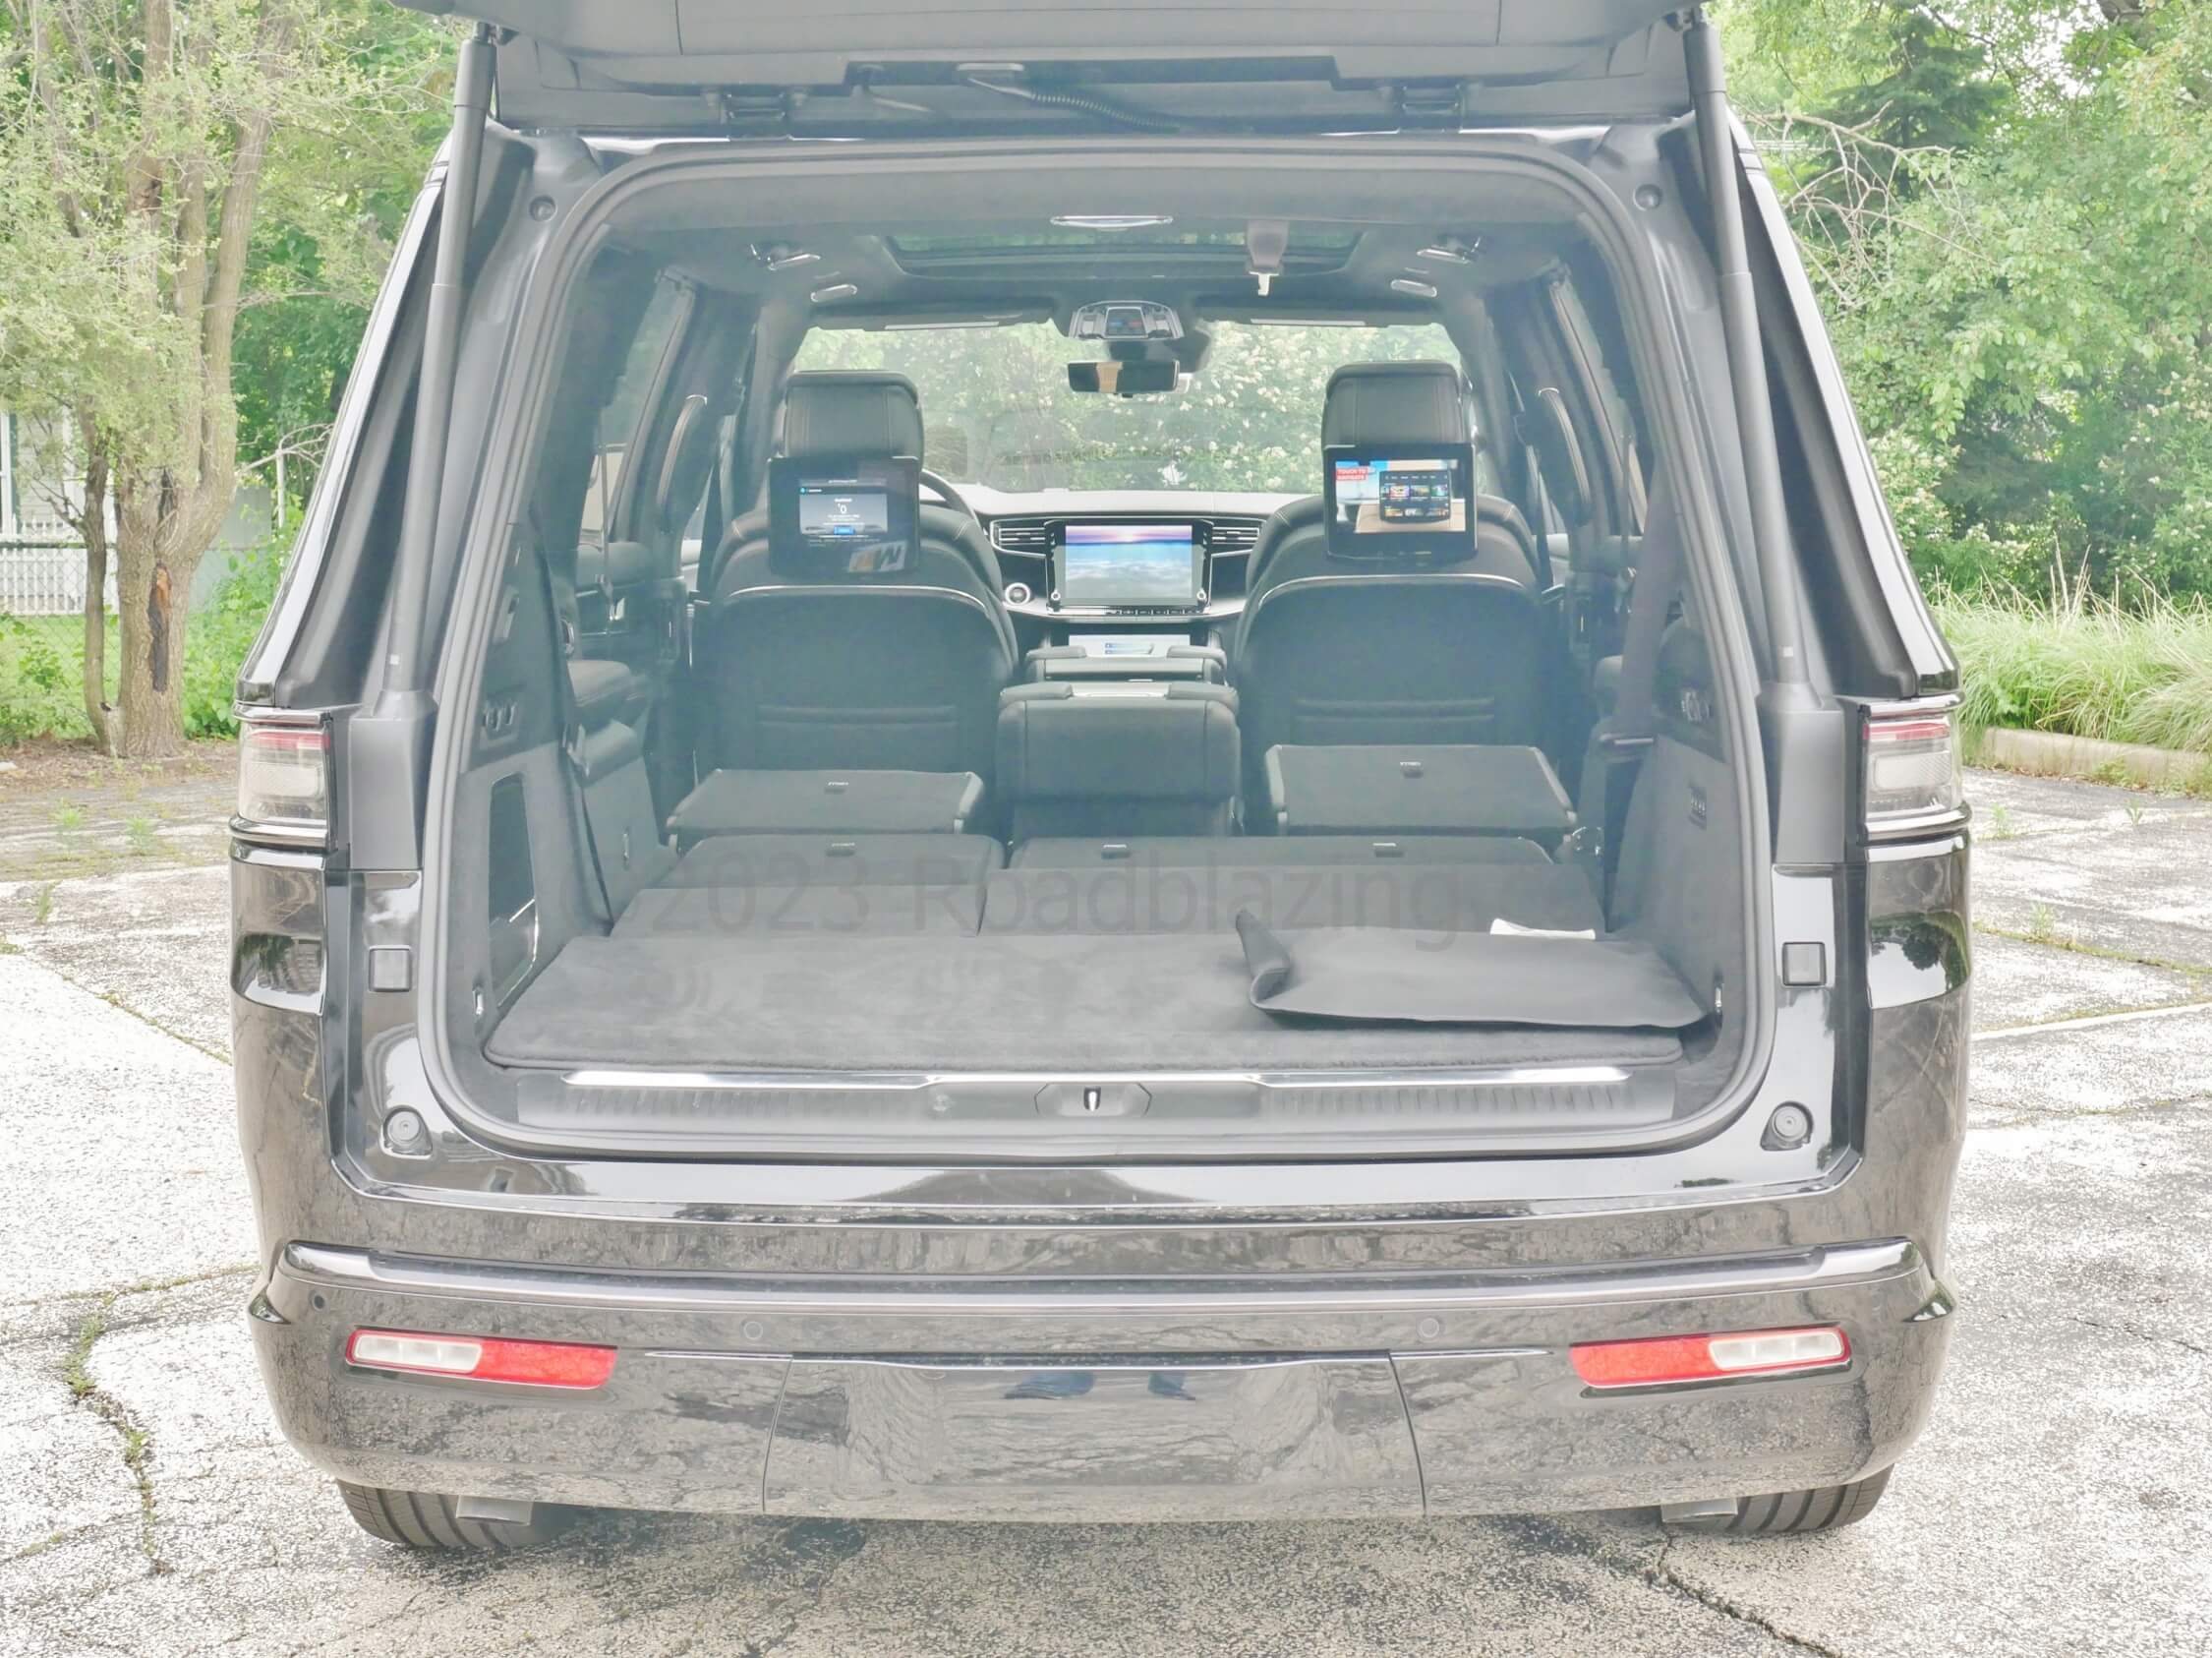 2022 Jeep Grand Wagoneer 6.4L Obsidian 4x4: 85 cubic feet post Row 1 expanded cargo capacity